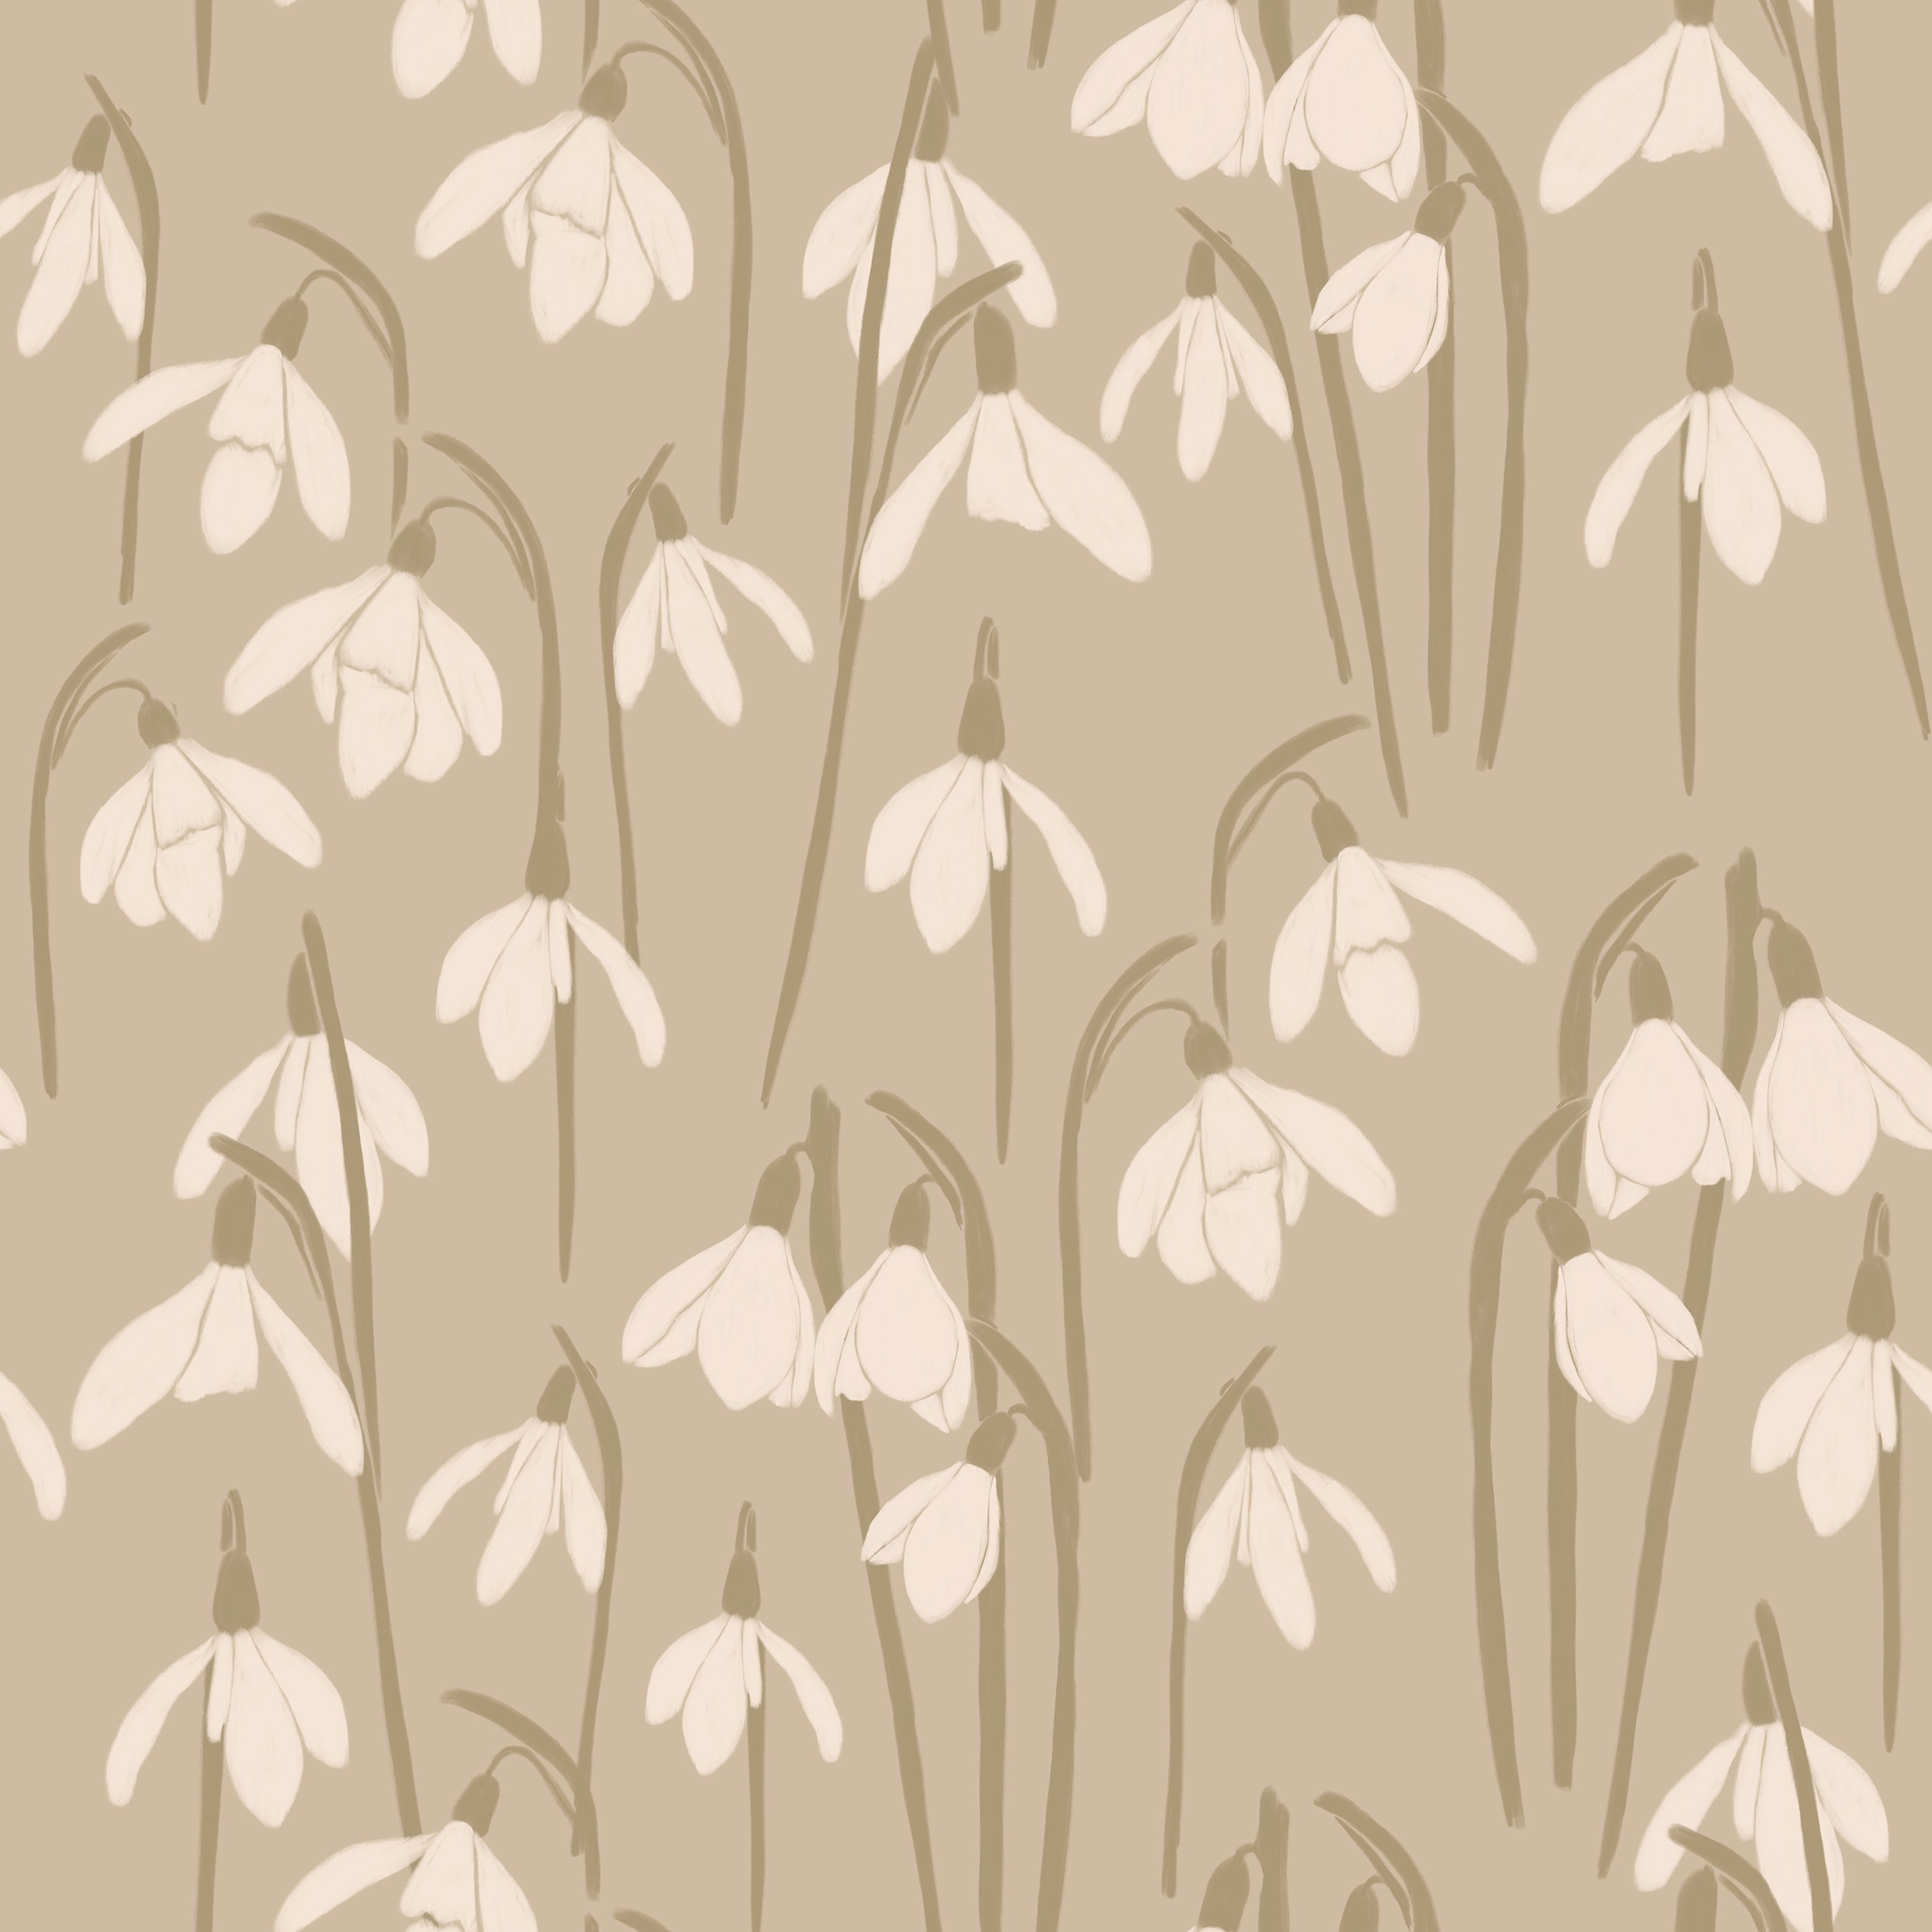 A seamless pattern of "Snowdrop Wallpaper - 25" featuring elegant snowdrop flowers in a minimalist style. The flowers are depicted in soft white on a taupe background, offering a soothing and subtle floral design that brings a touch of spring indoors.